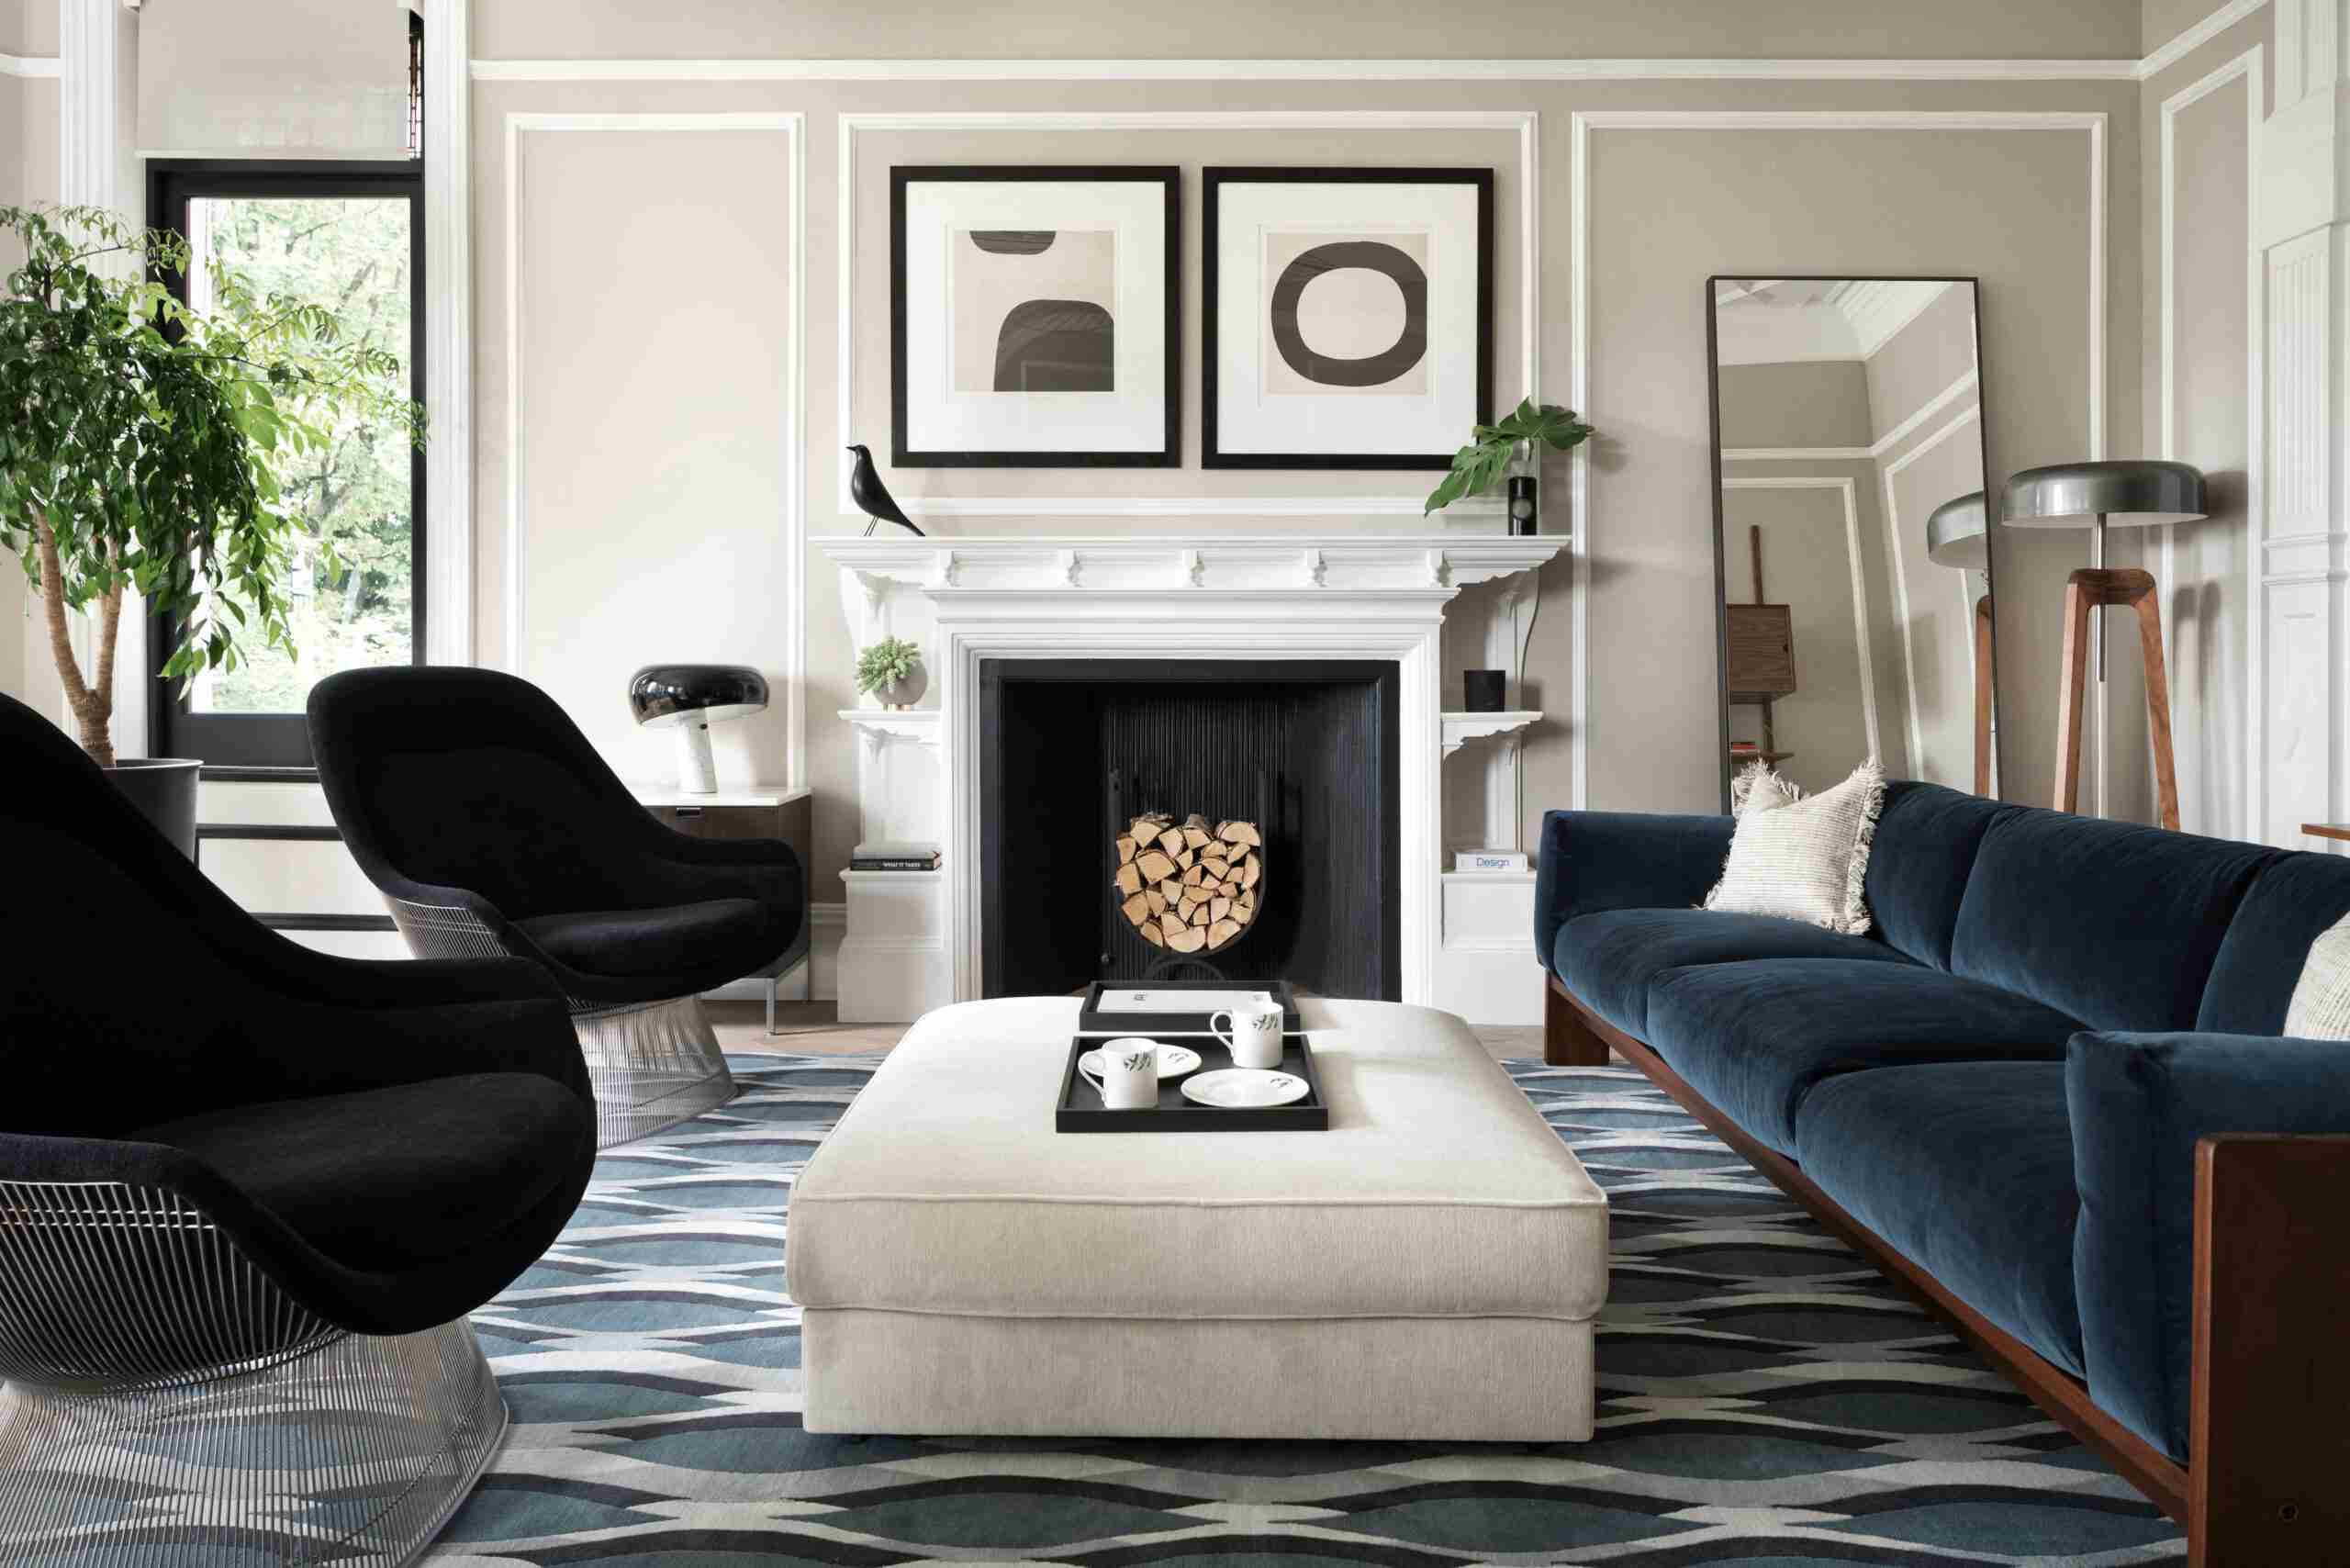 Interior Design Trends in London’s Property: Creating the Ultimate Urban Sanctuary